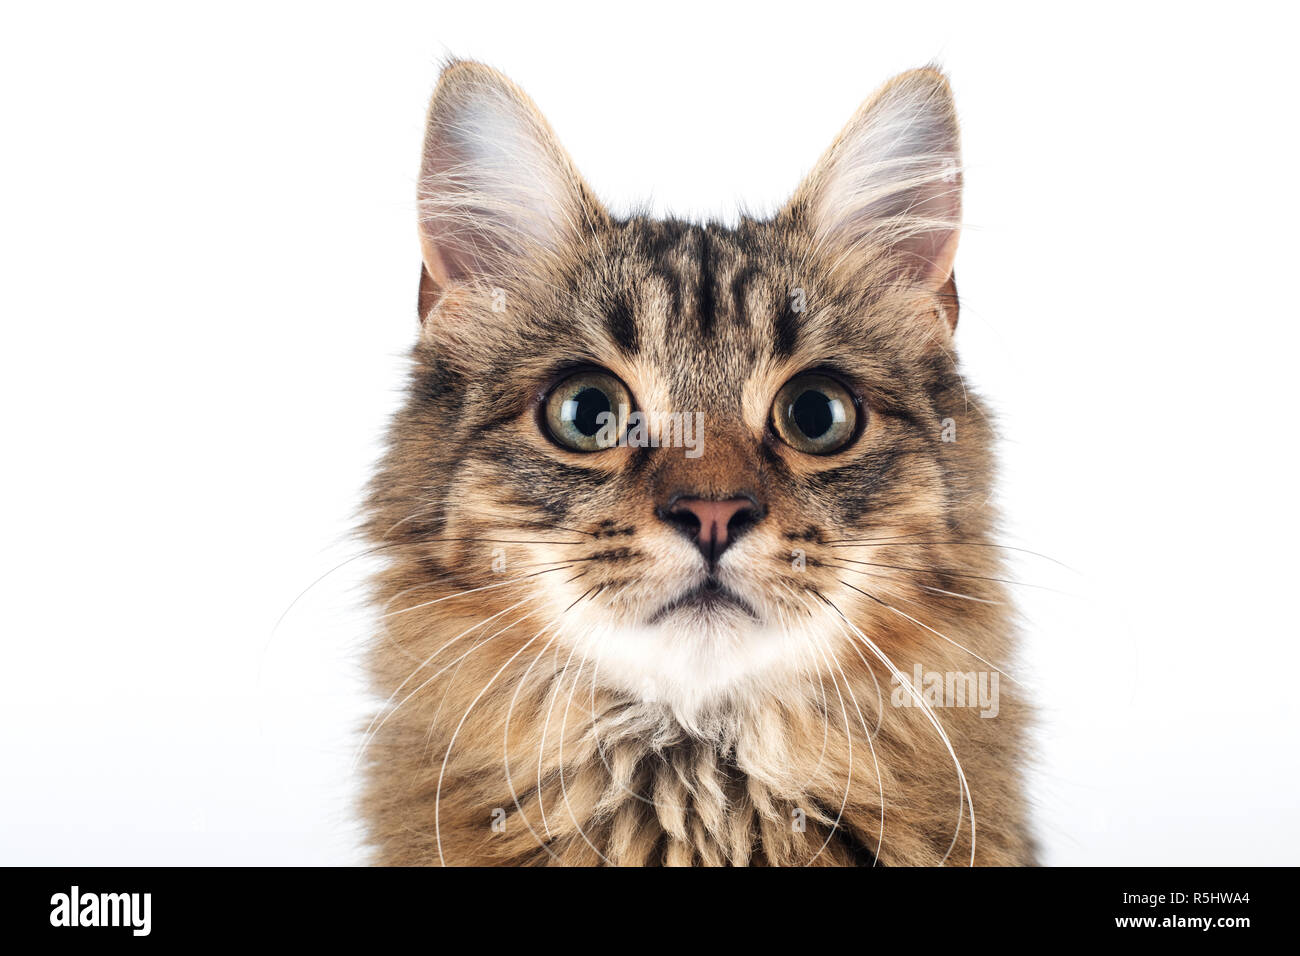 Pretty cat mixed breed on white background closeup portrait Stock Photo